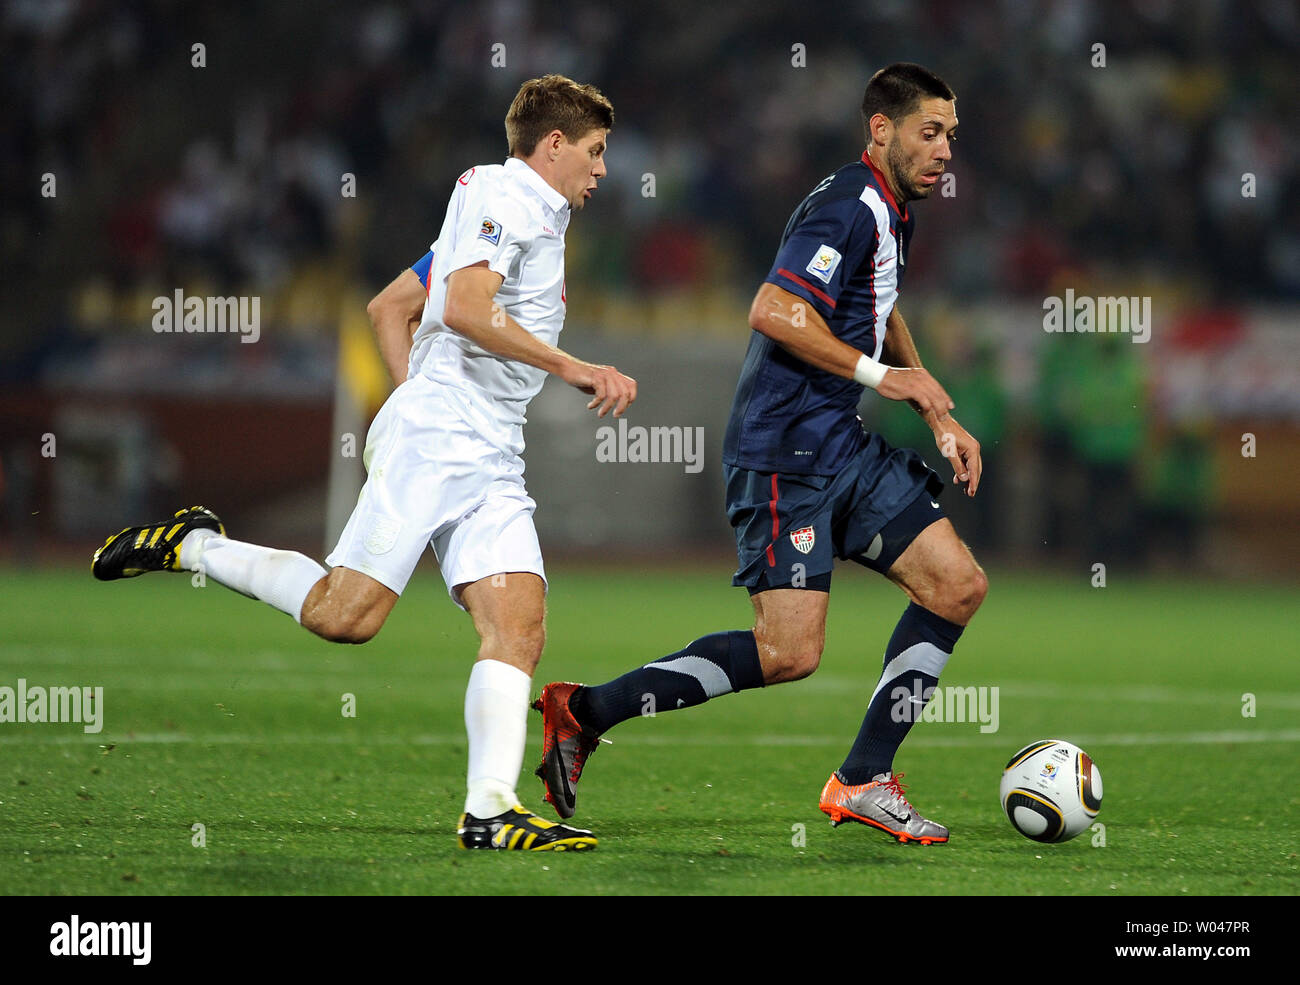 Steven Gerrard of England battles with Clint Dempsey of USA during the Group B match at the Royal Bafokeng Stadium in Rustenburg, South Africa on June 12, 2010. UPI/Chris Brunskill Stock Photo